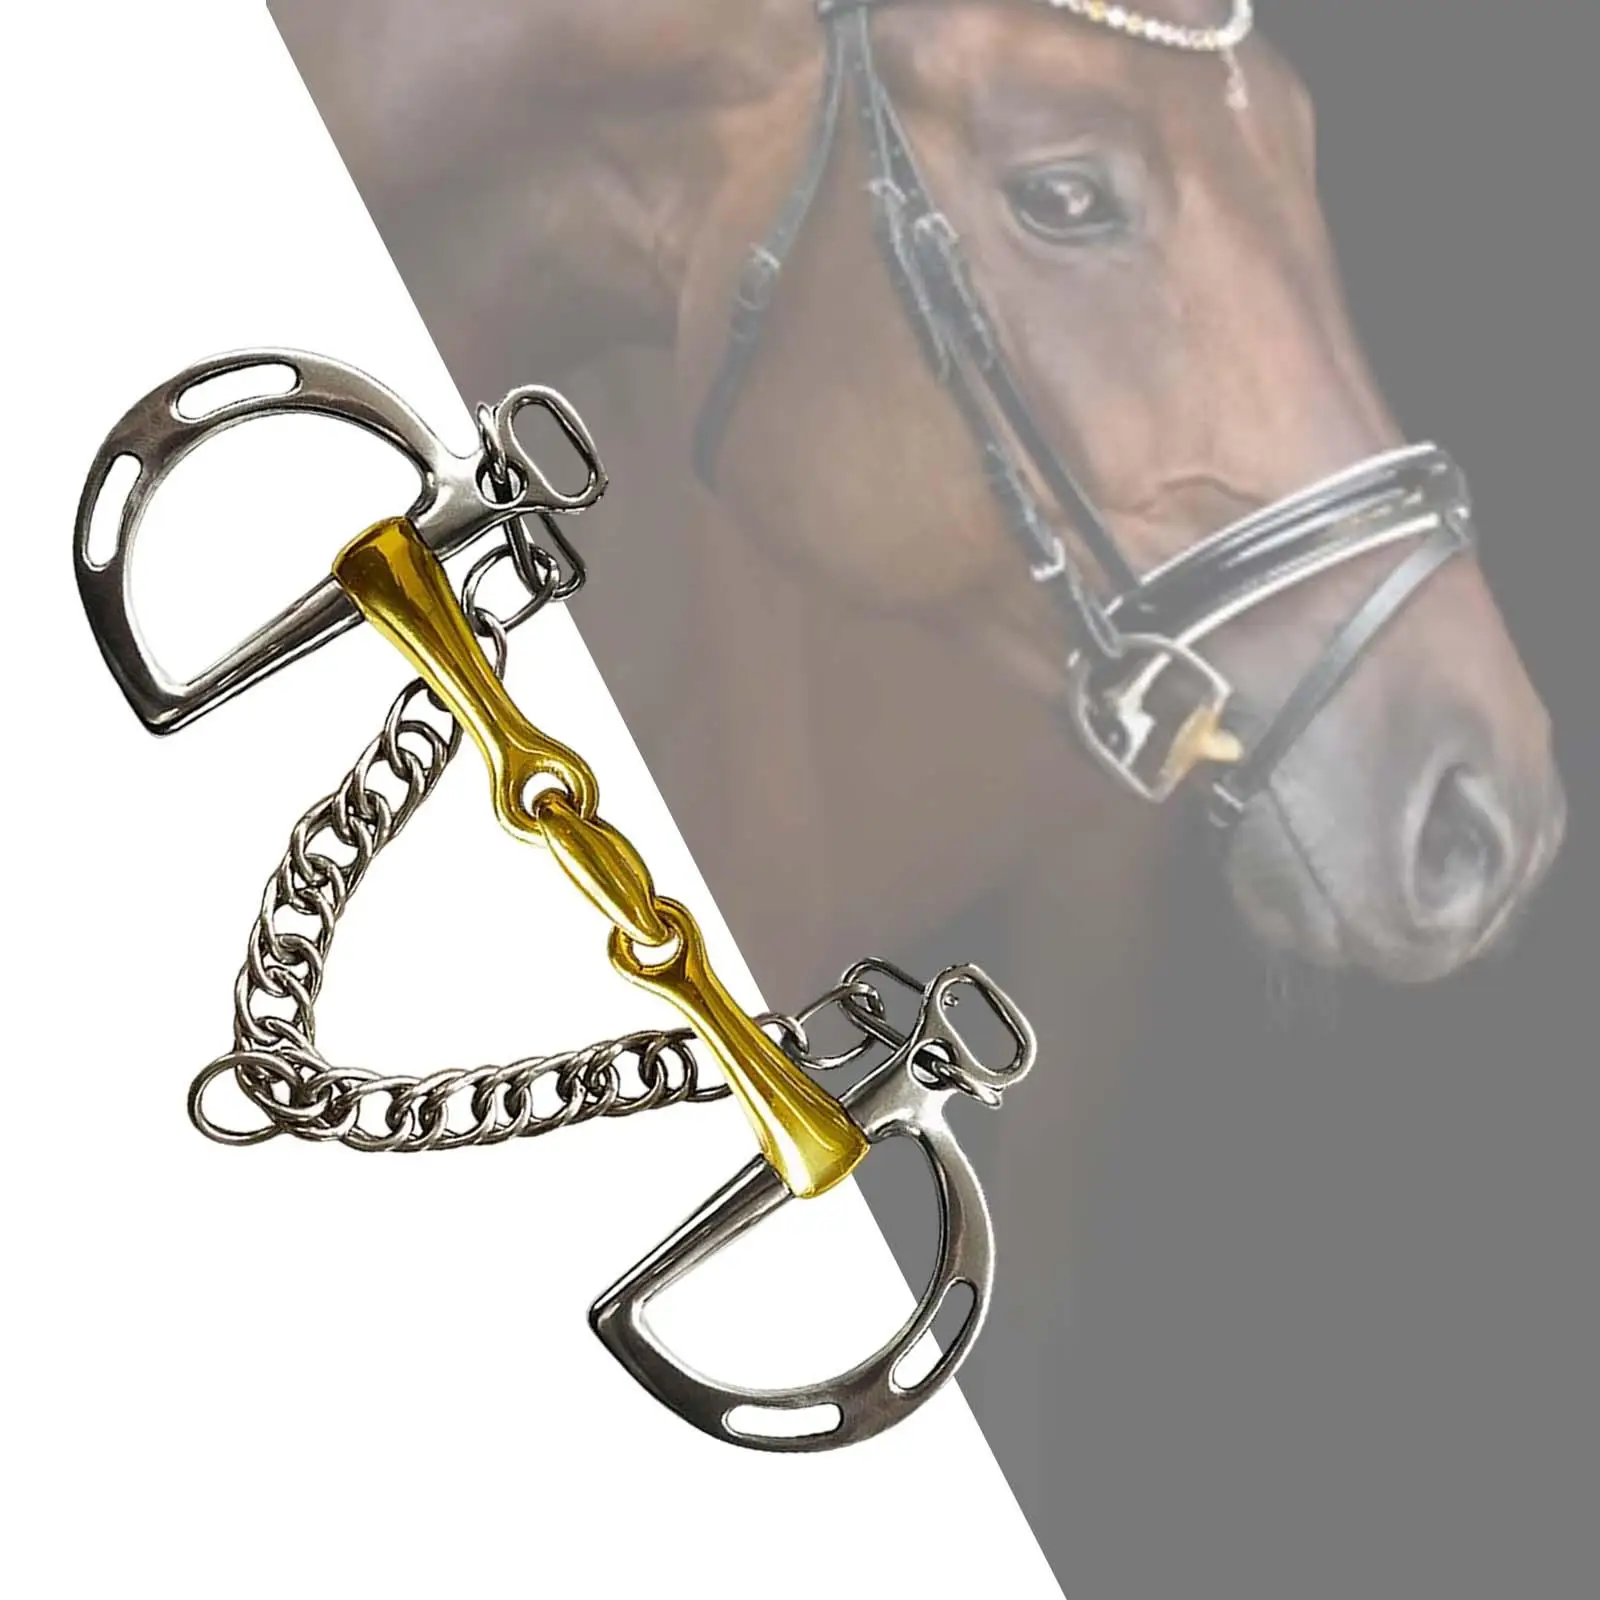 Horse Bit Copper Mouth Copper Roller W/Curb Hooks Chain Stainless Steel with Silver Trims Harness for Horse Chewing Equestrian